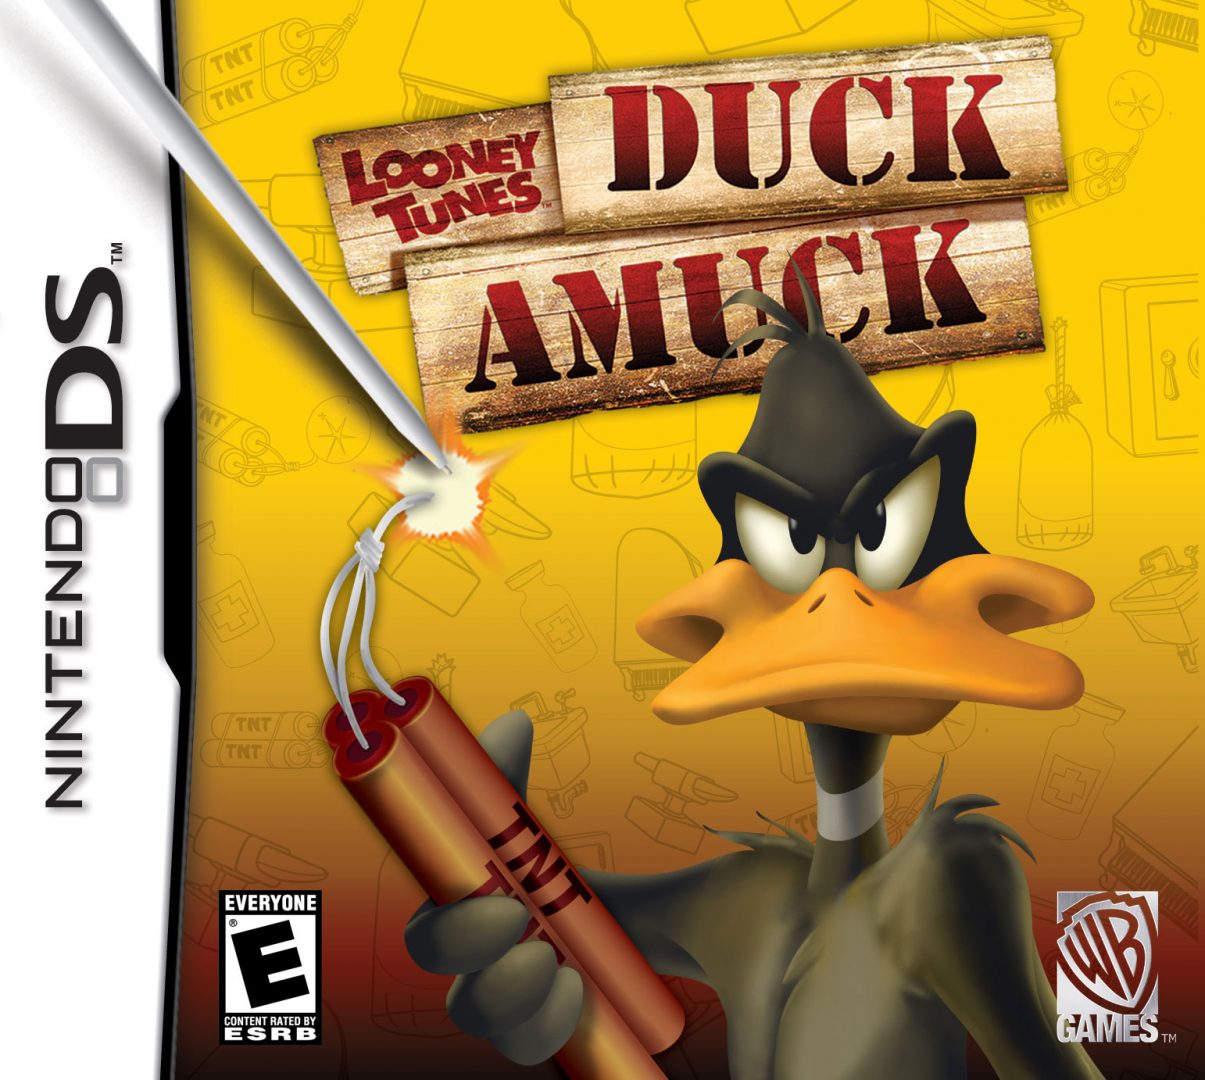 The coverart image of Looney Tunes: Duck Amuck